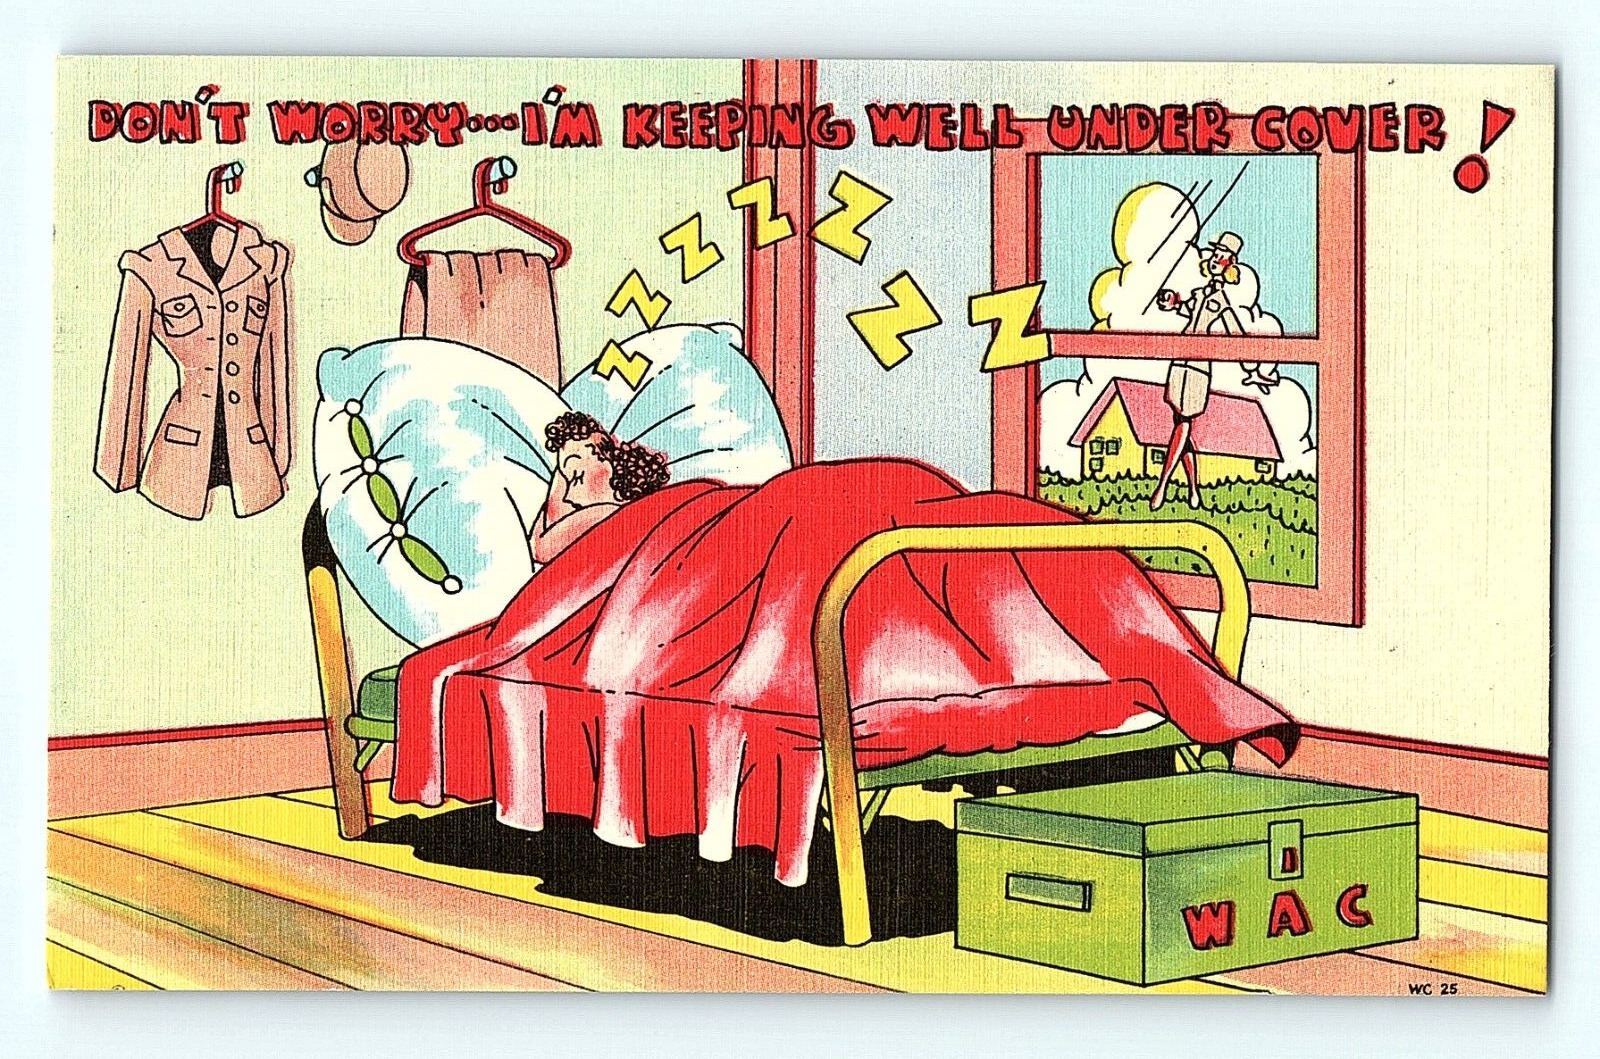 Don't Worry... I'm Keeping Well Under Cover Cartoon Military Humor Postcard E4